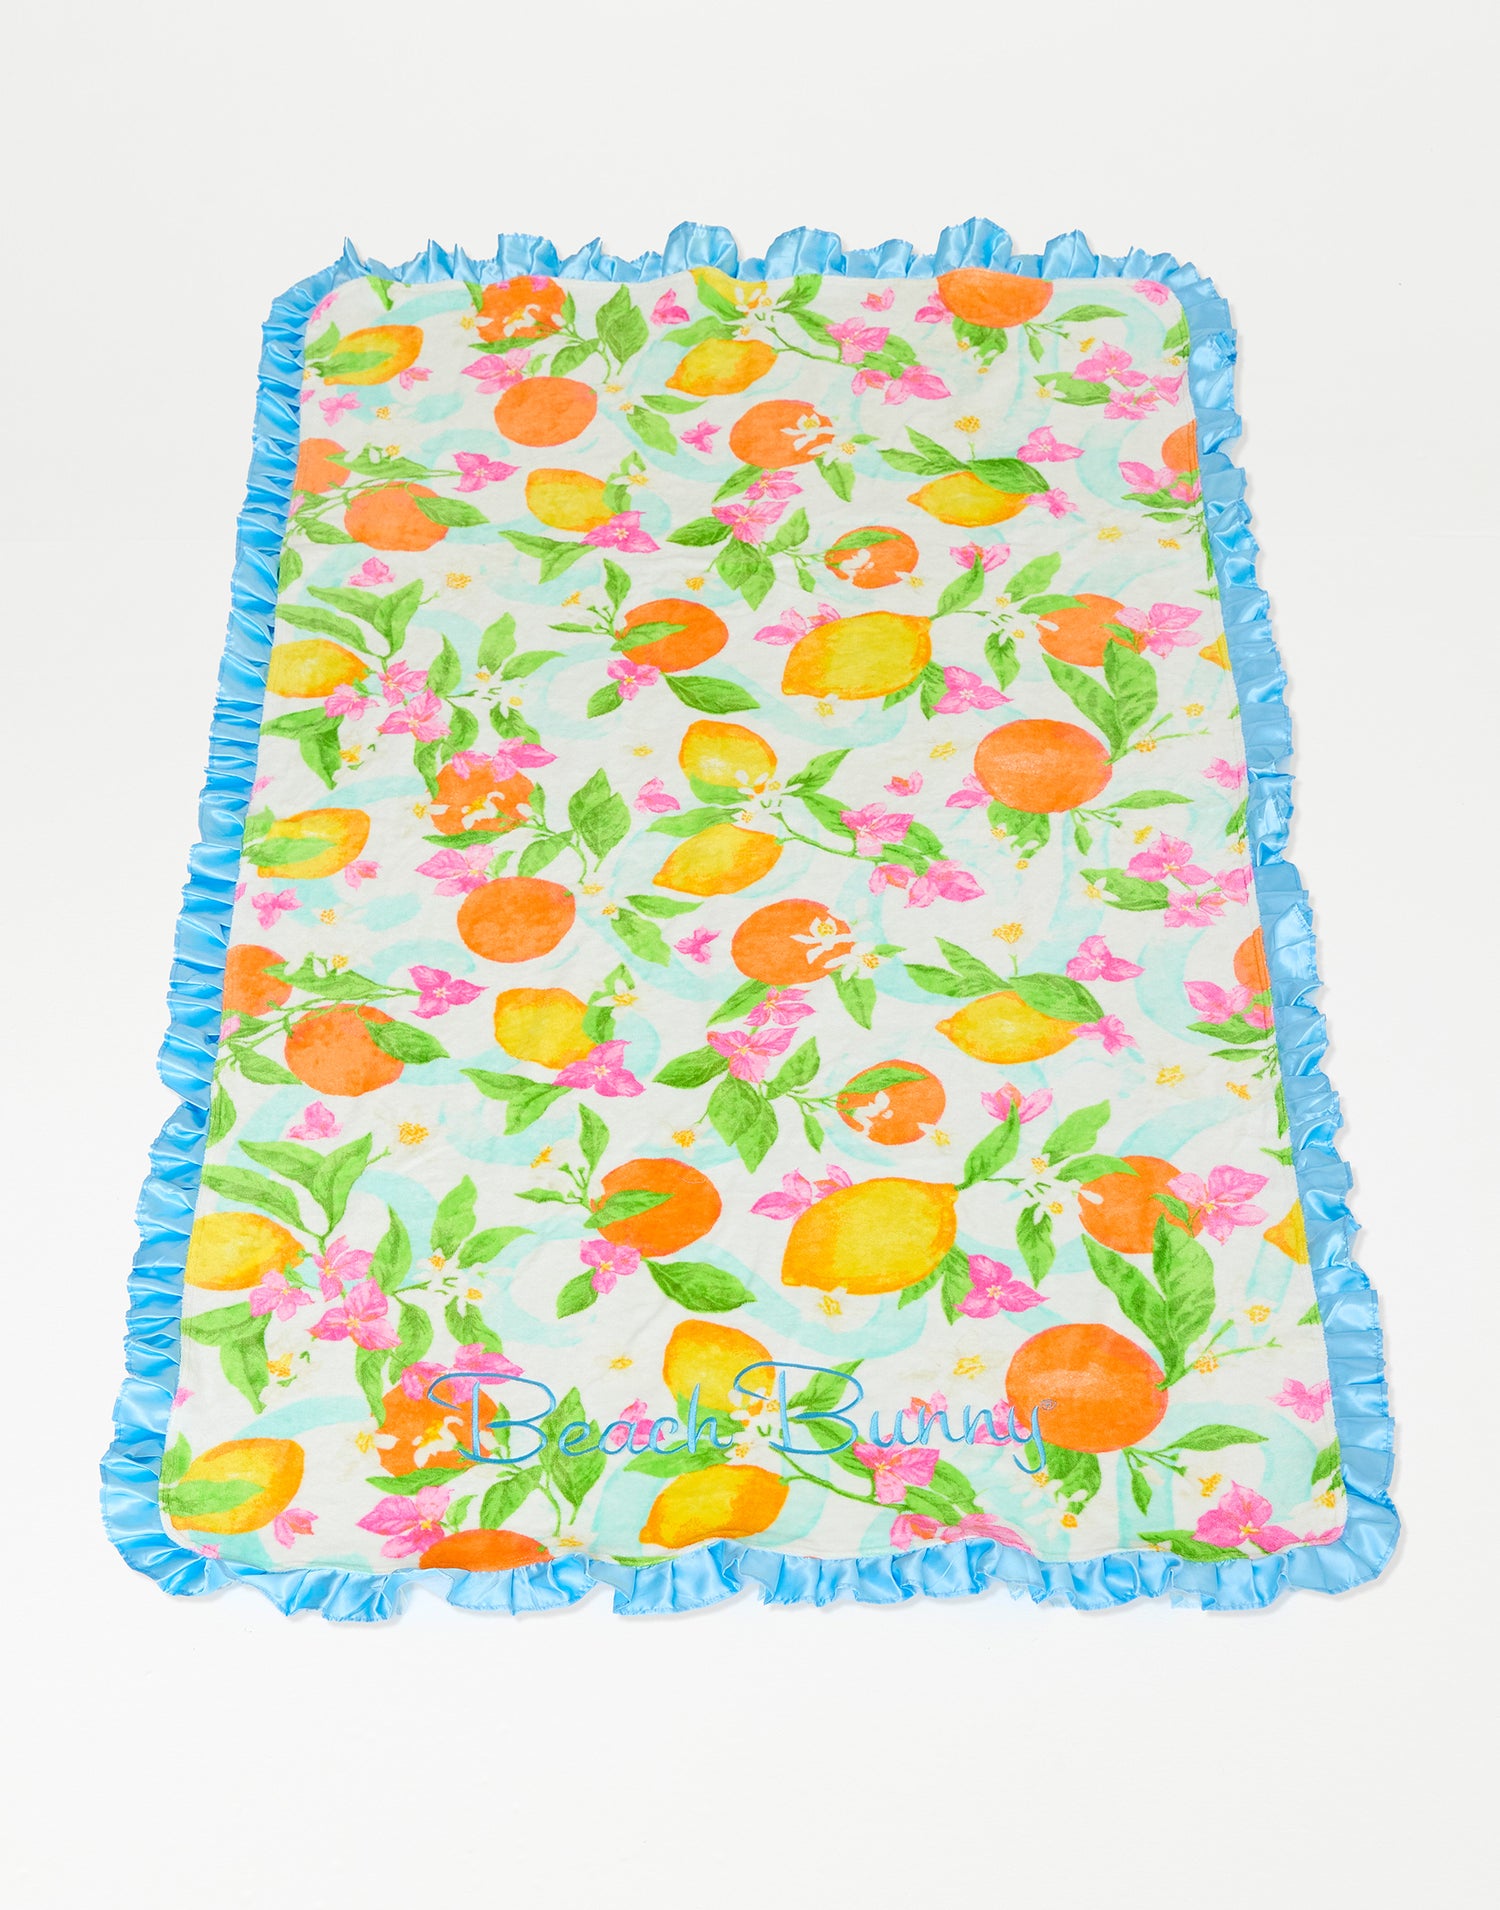 Clementine Floral Beach Towel with Aqua Ruffle Trim - Product View